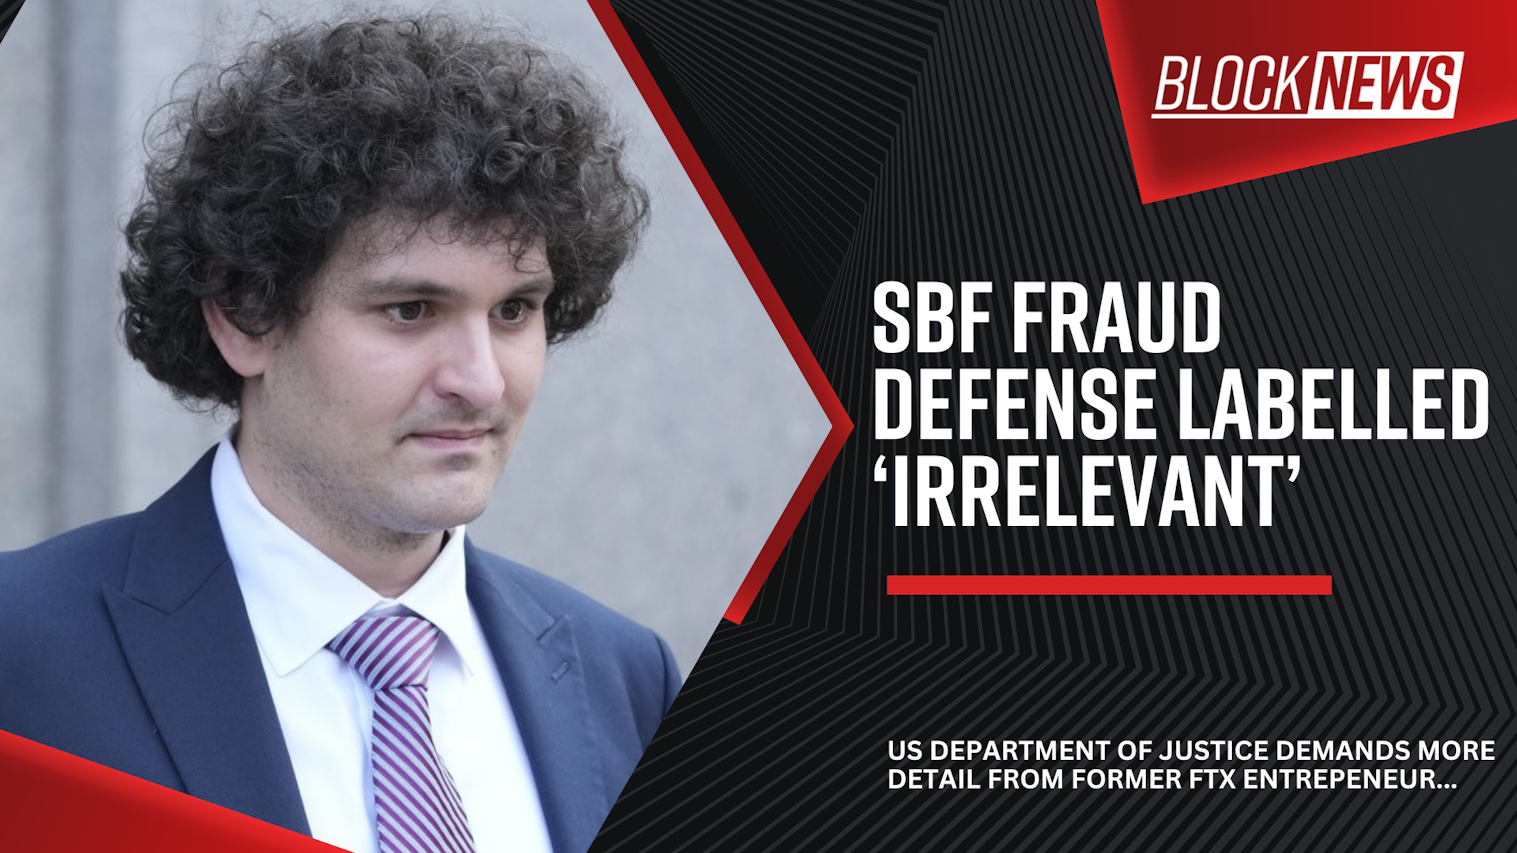 sbf-told-to-improve-defense-case-against-alleged-fraud